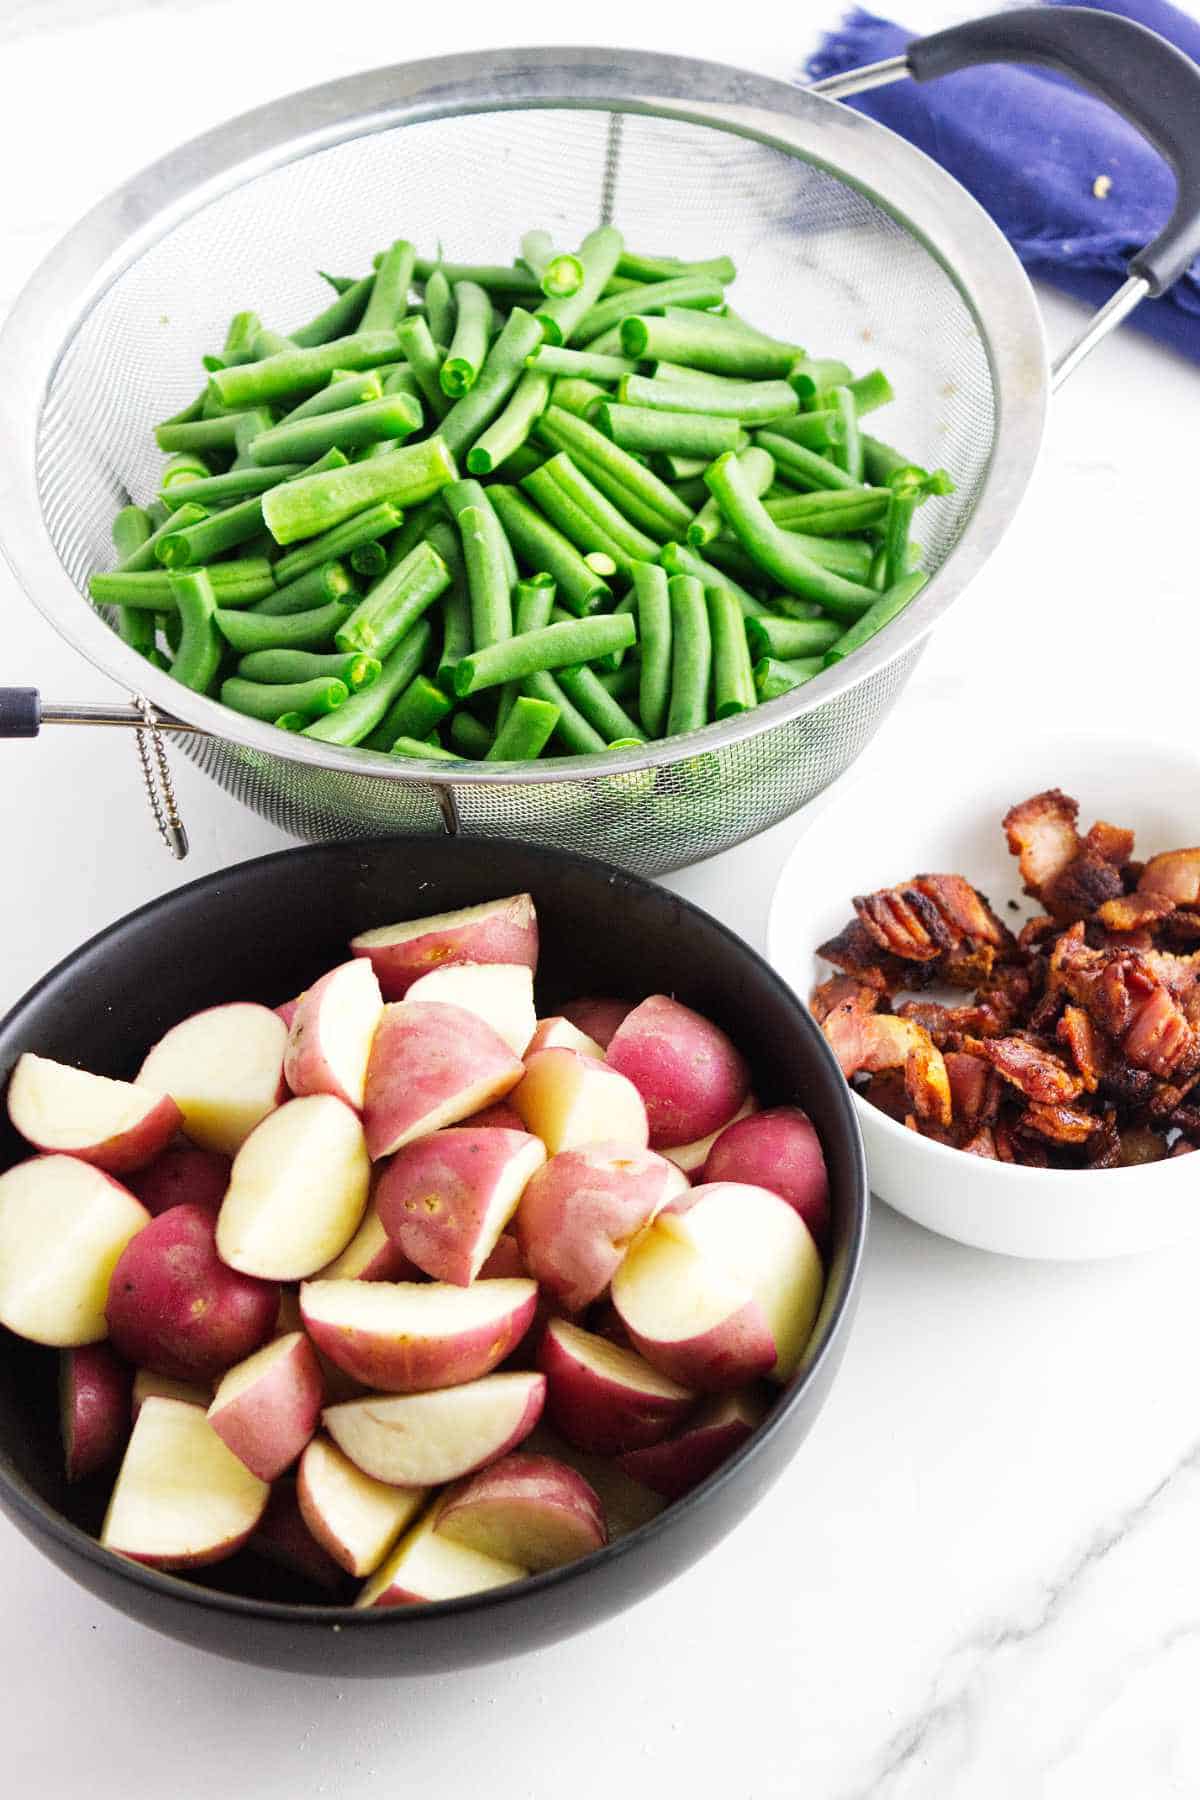 washed and cut green beans, cooked bacon, and quartered red new potatoes.